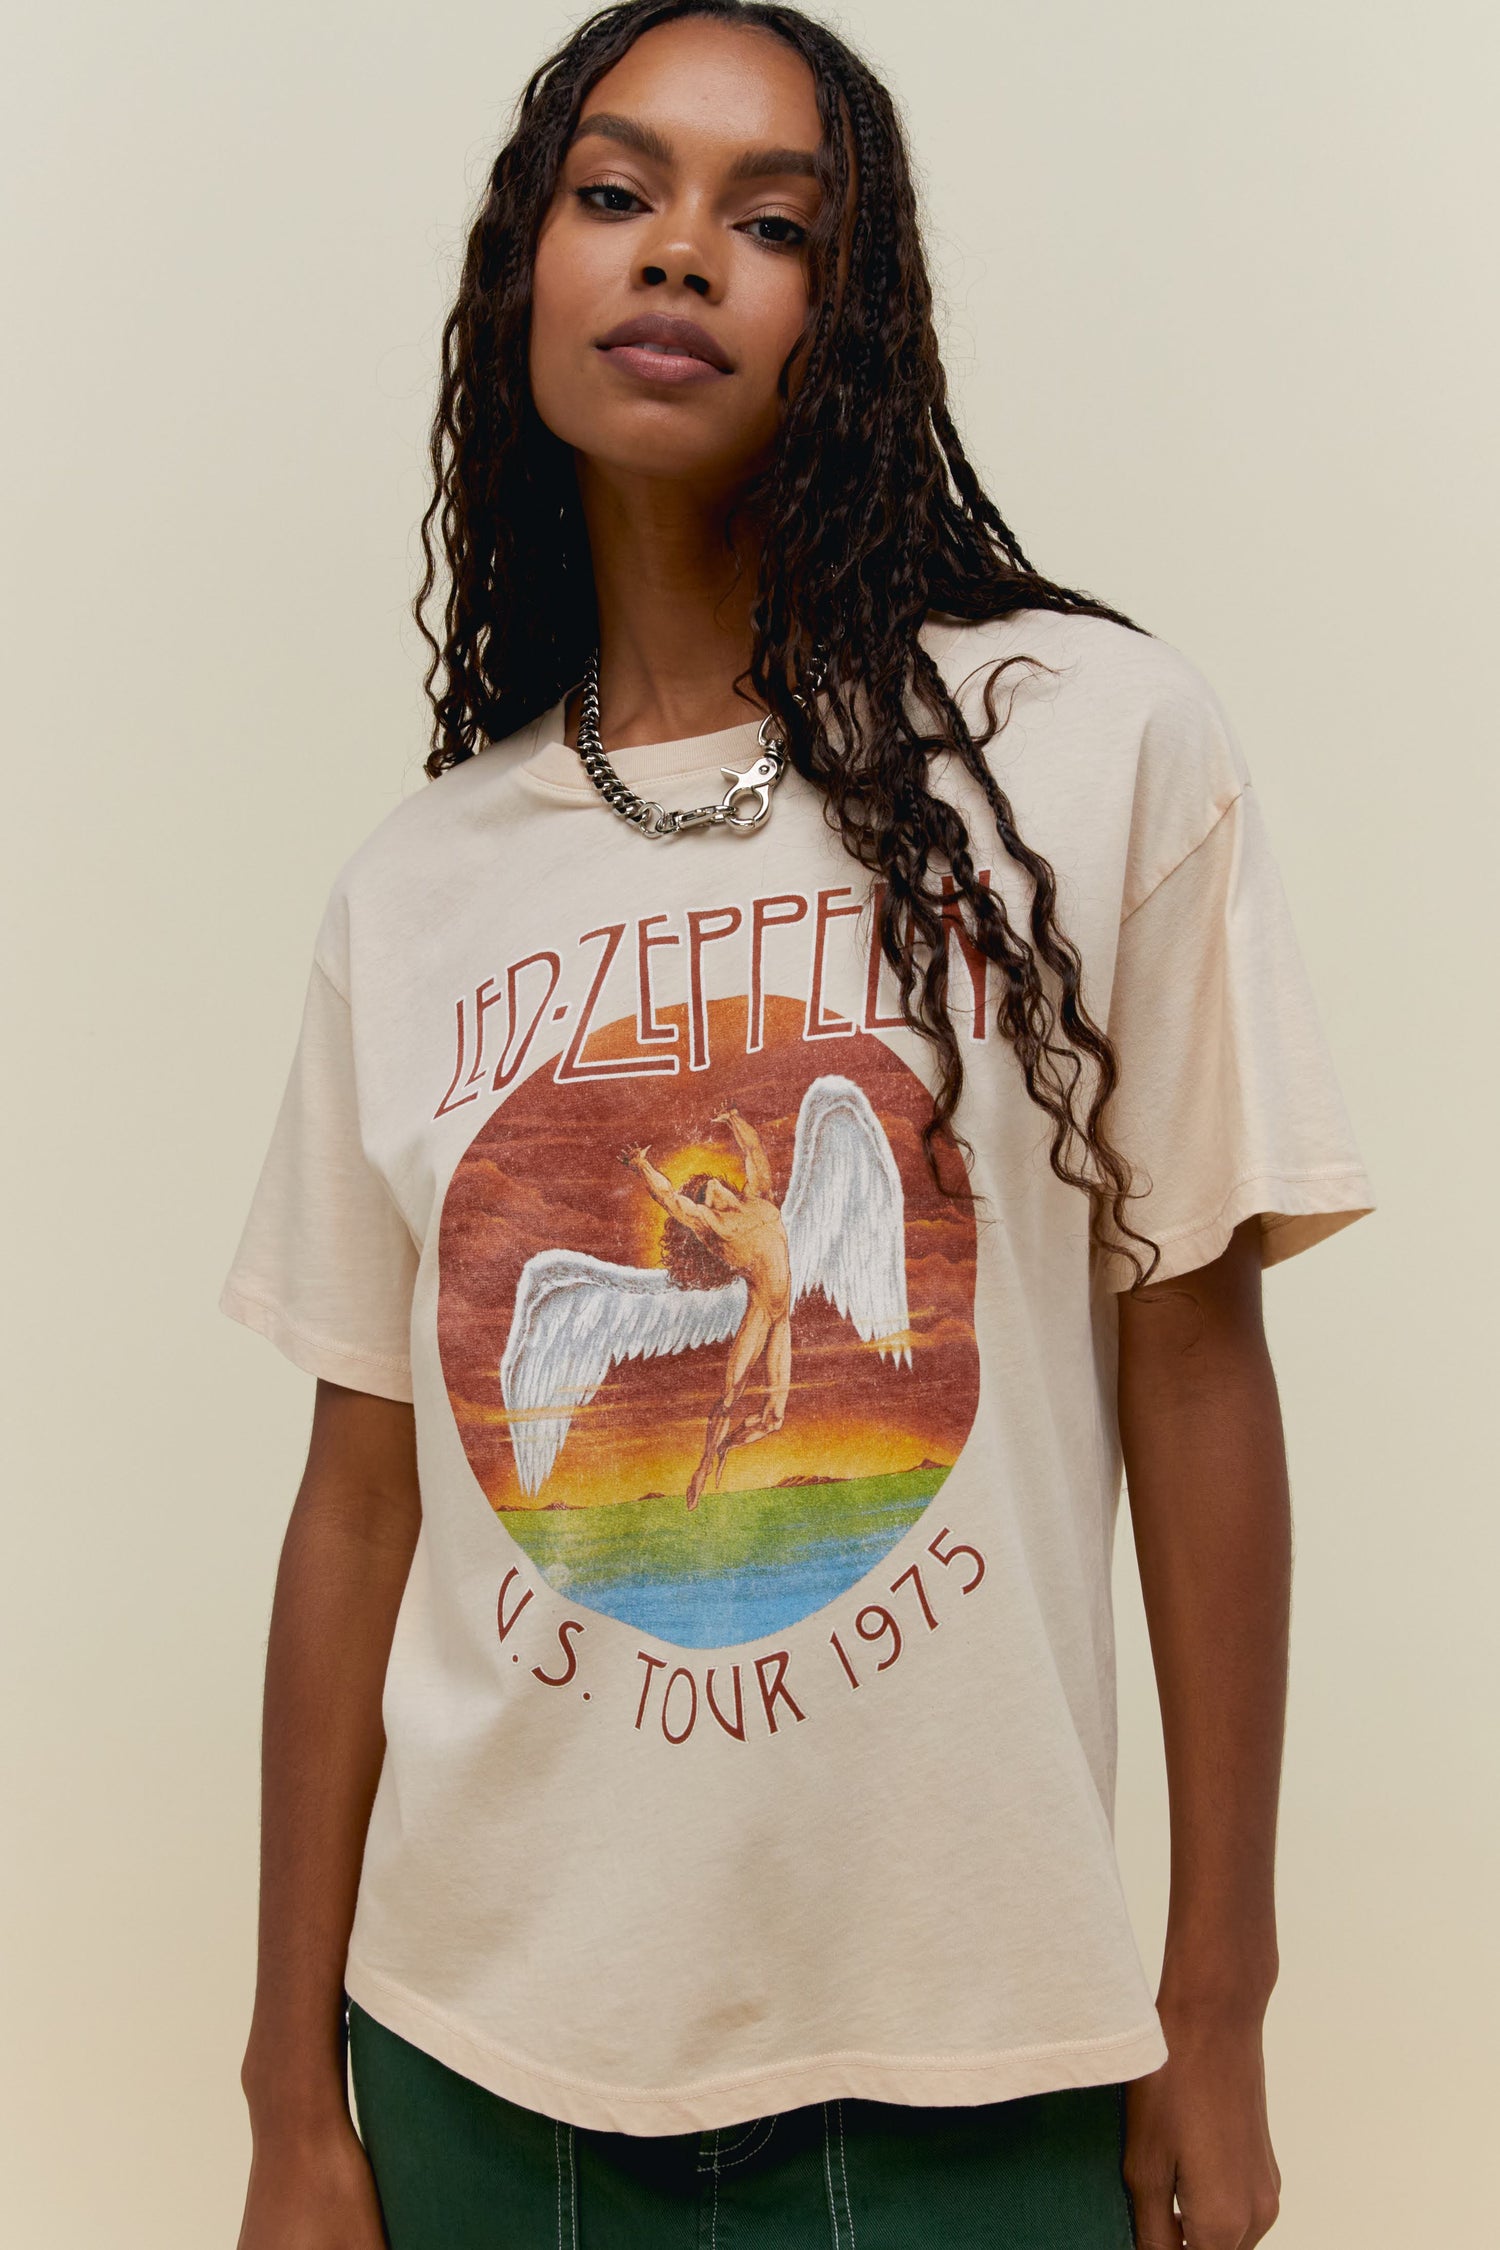 A model featuring a Led Zeppelin boyfriend tee stamped with "LED ZEPPELIN US TOUR 1975" and graphic design of an angel in the middle.